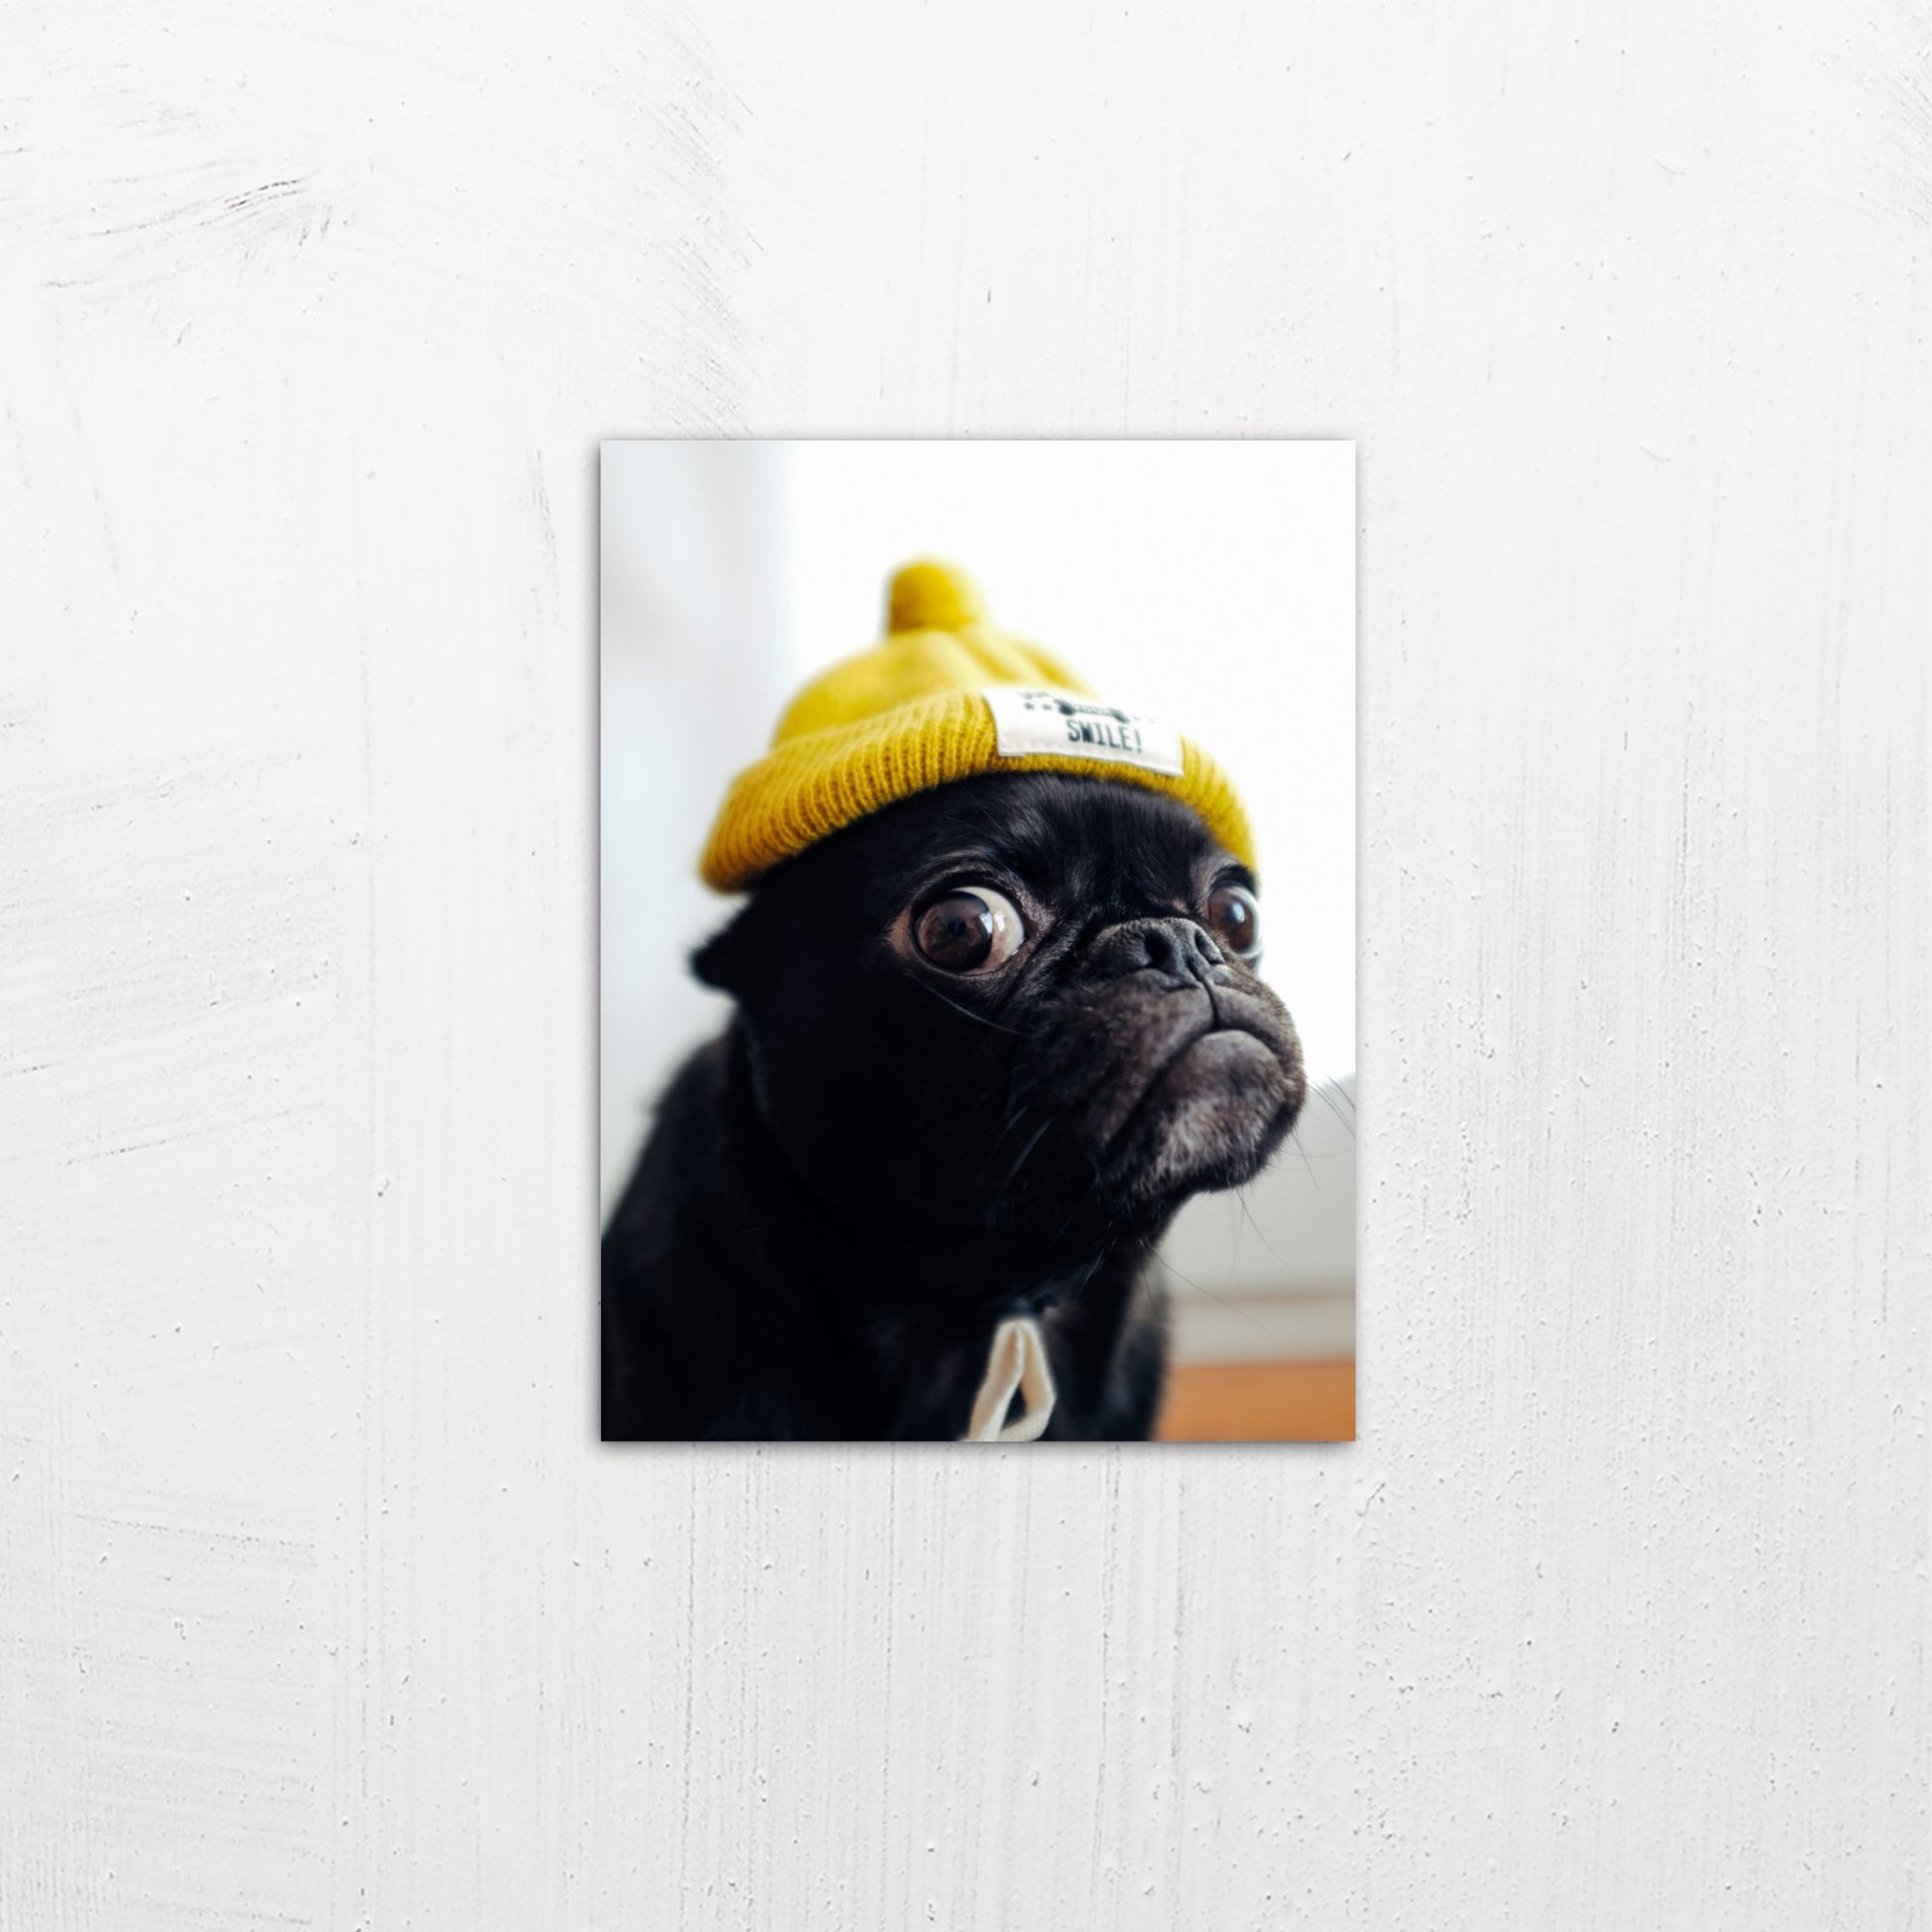 A small size metal art poster display plate with printed design of a Pug in a Yellow Hat